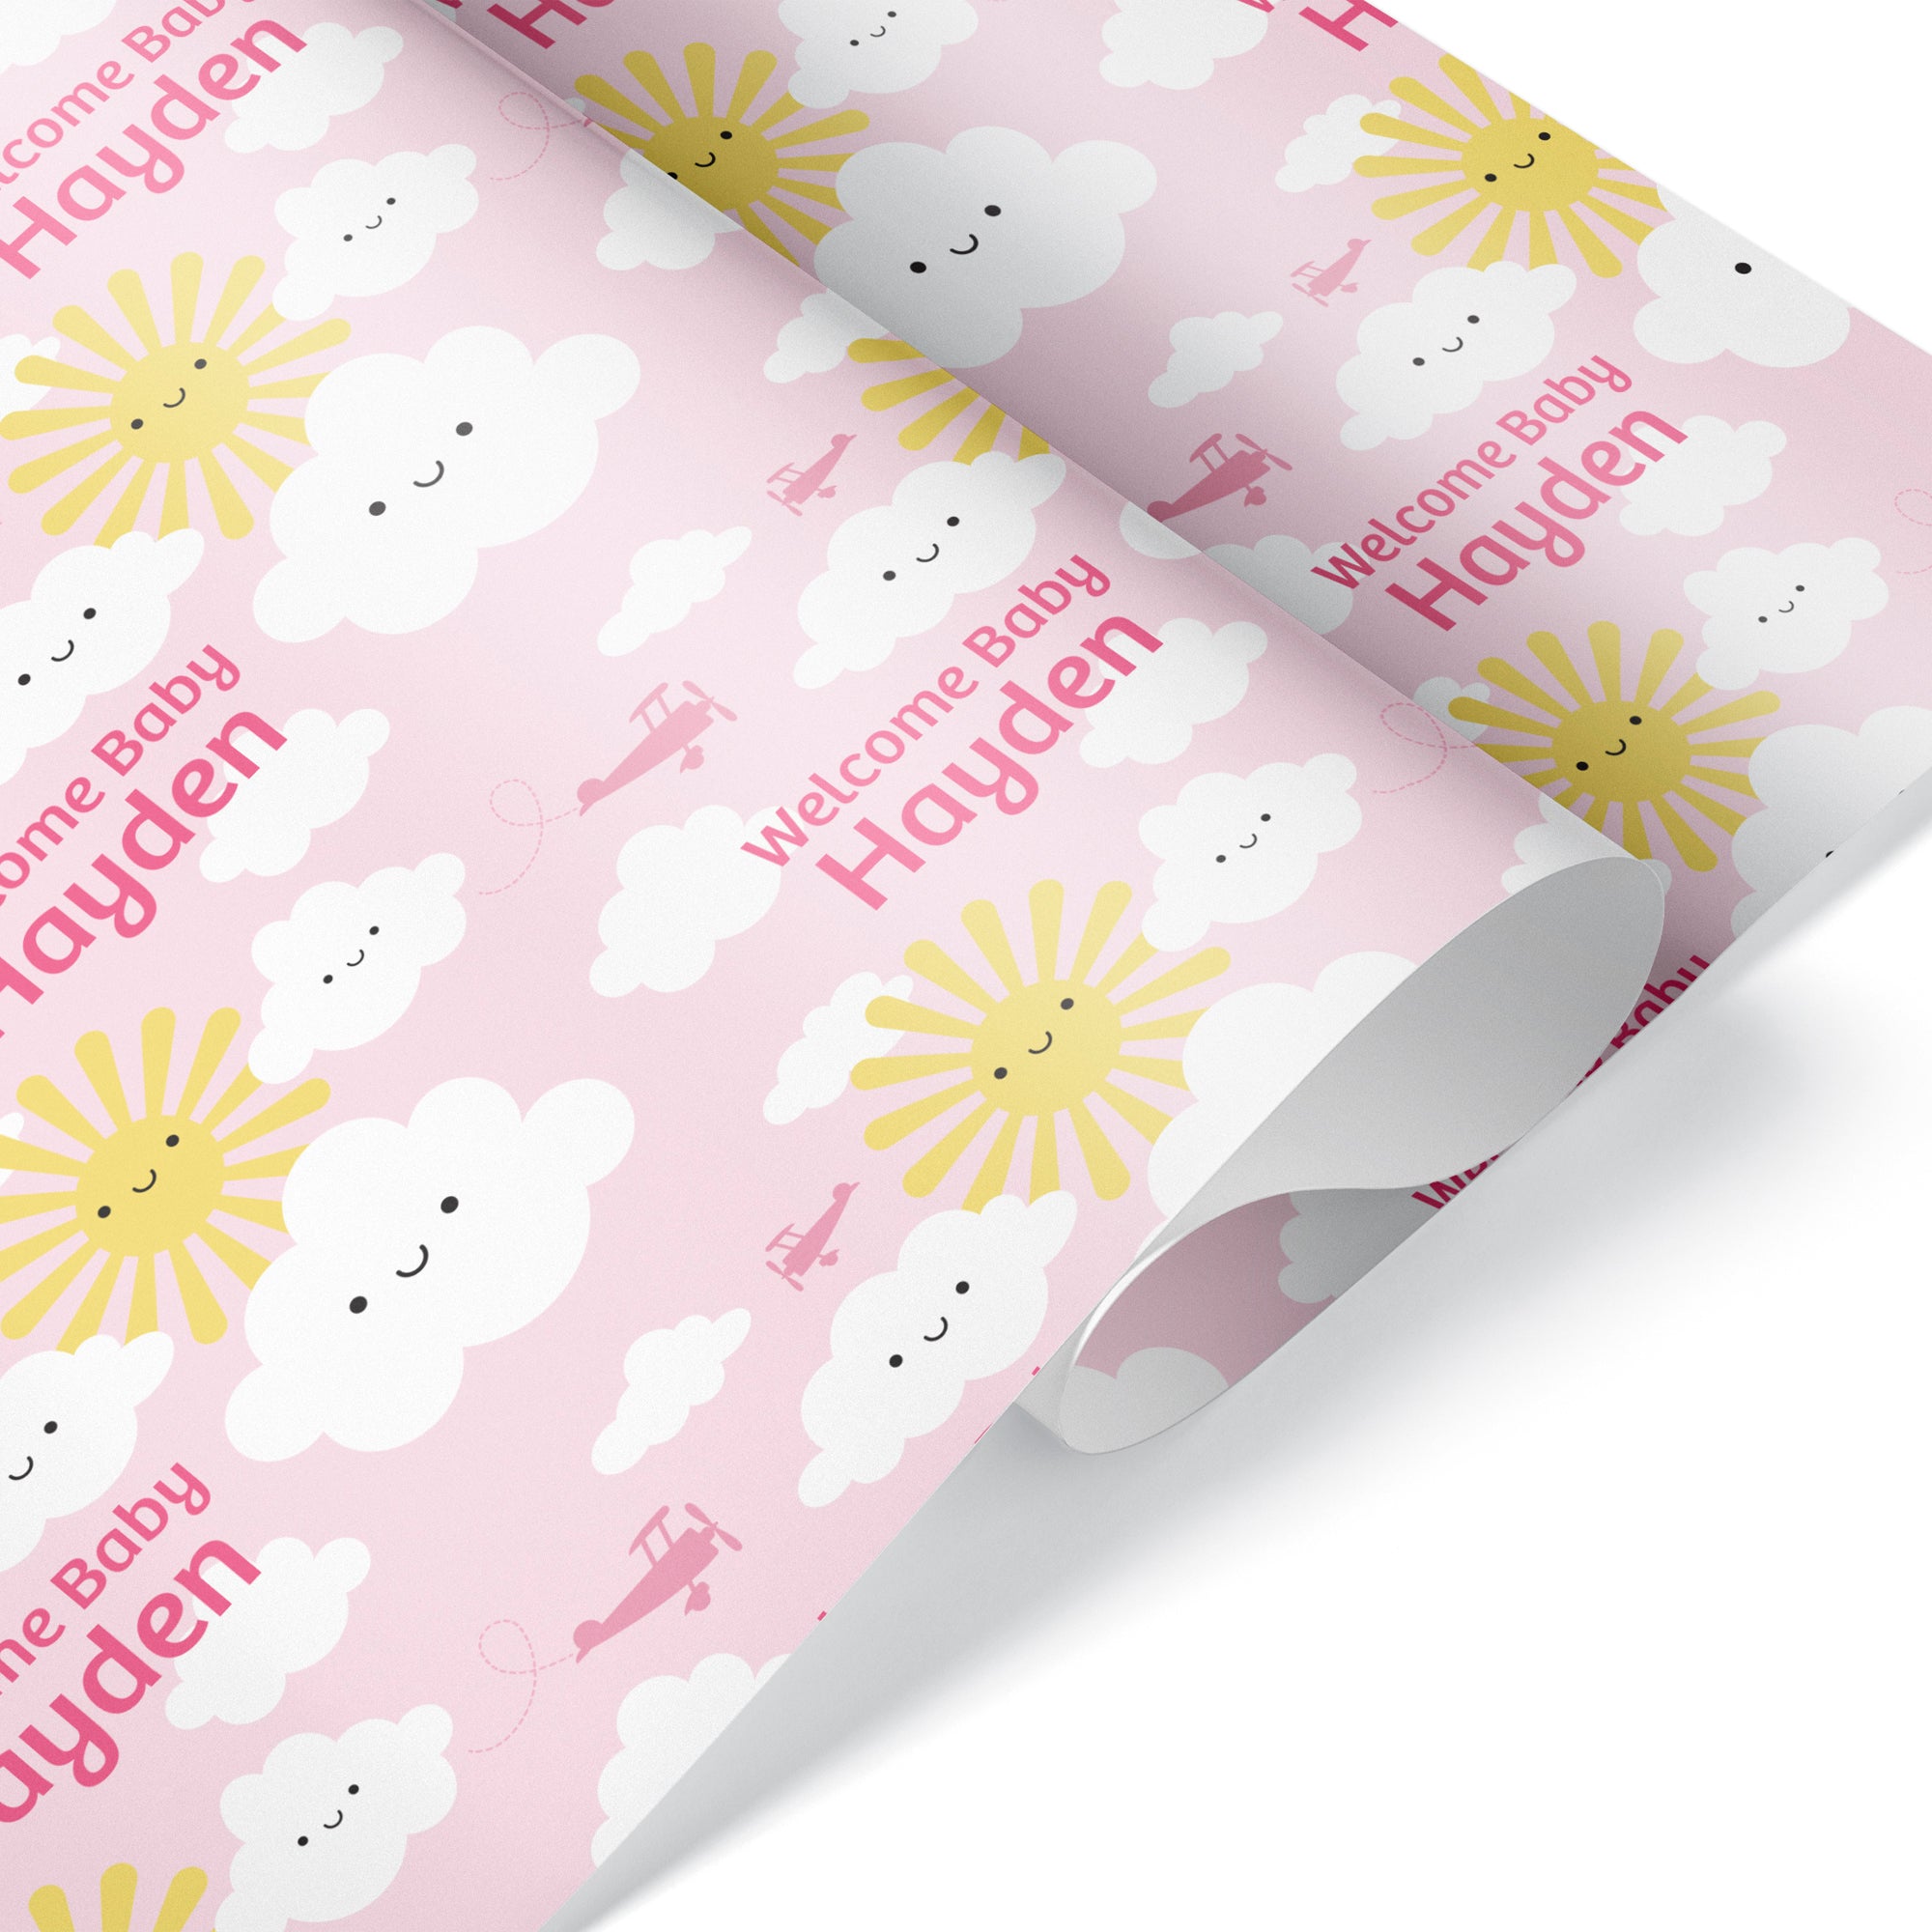 Personalise Flat Wrapping Paper for Baby Shower, Birthday - Cute